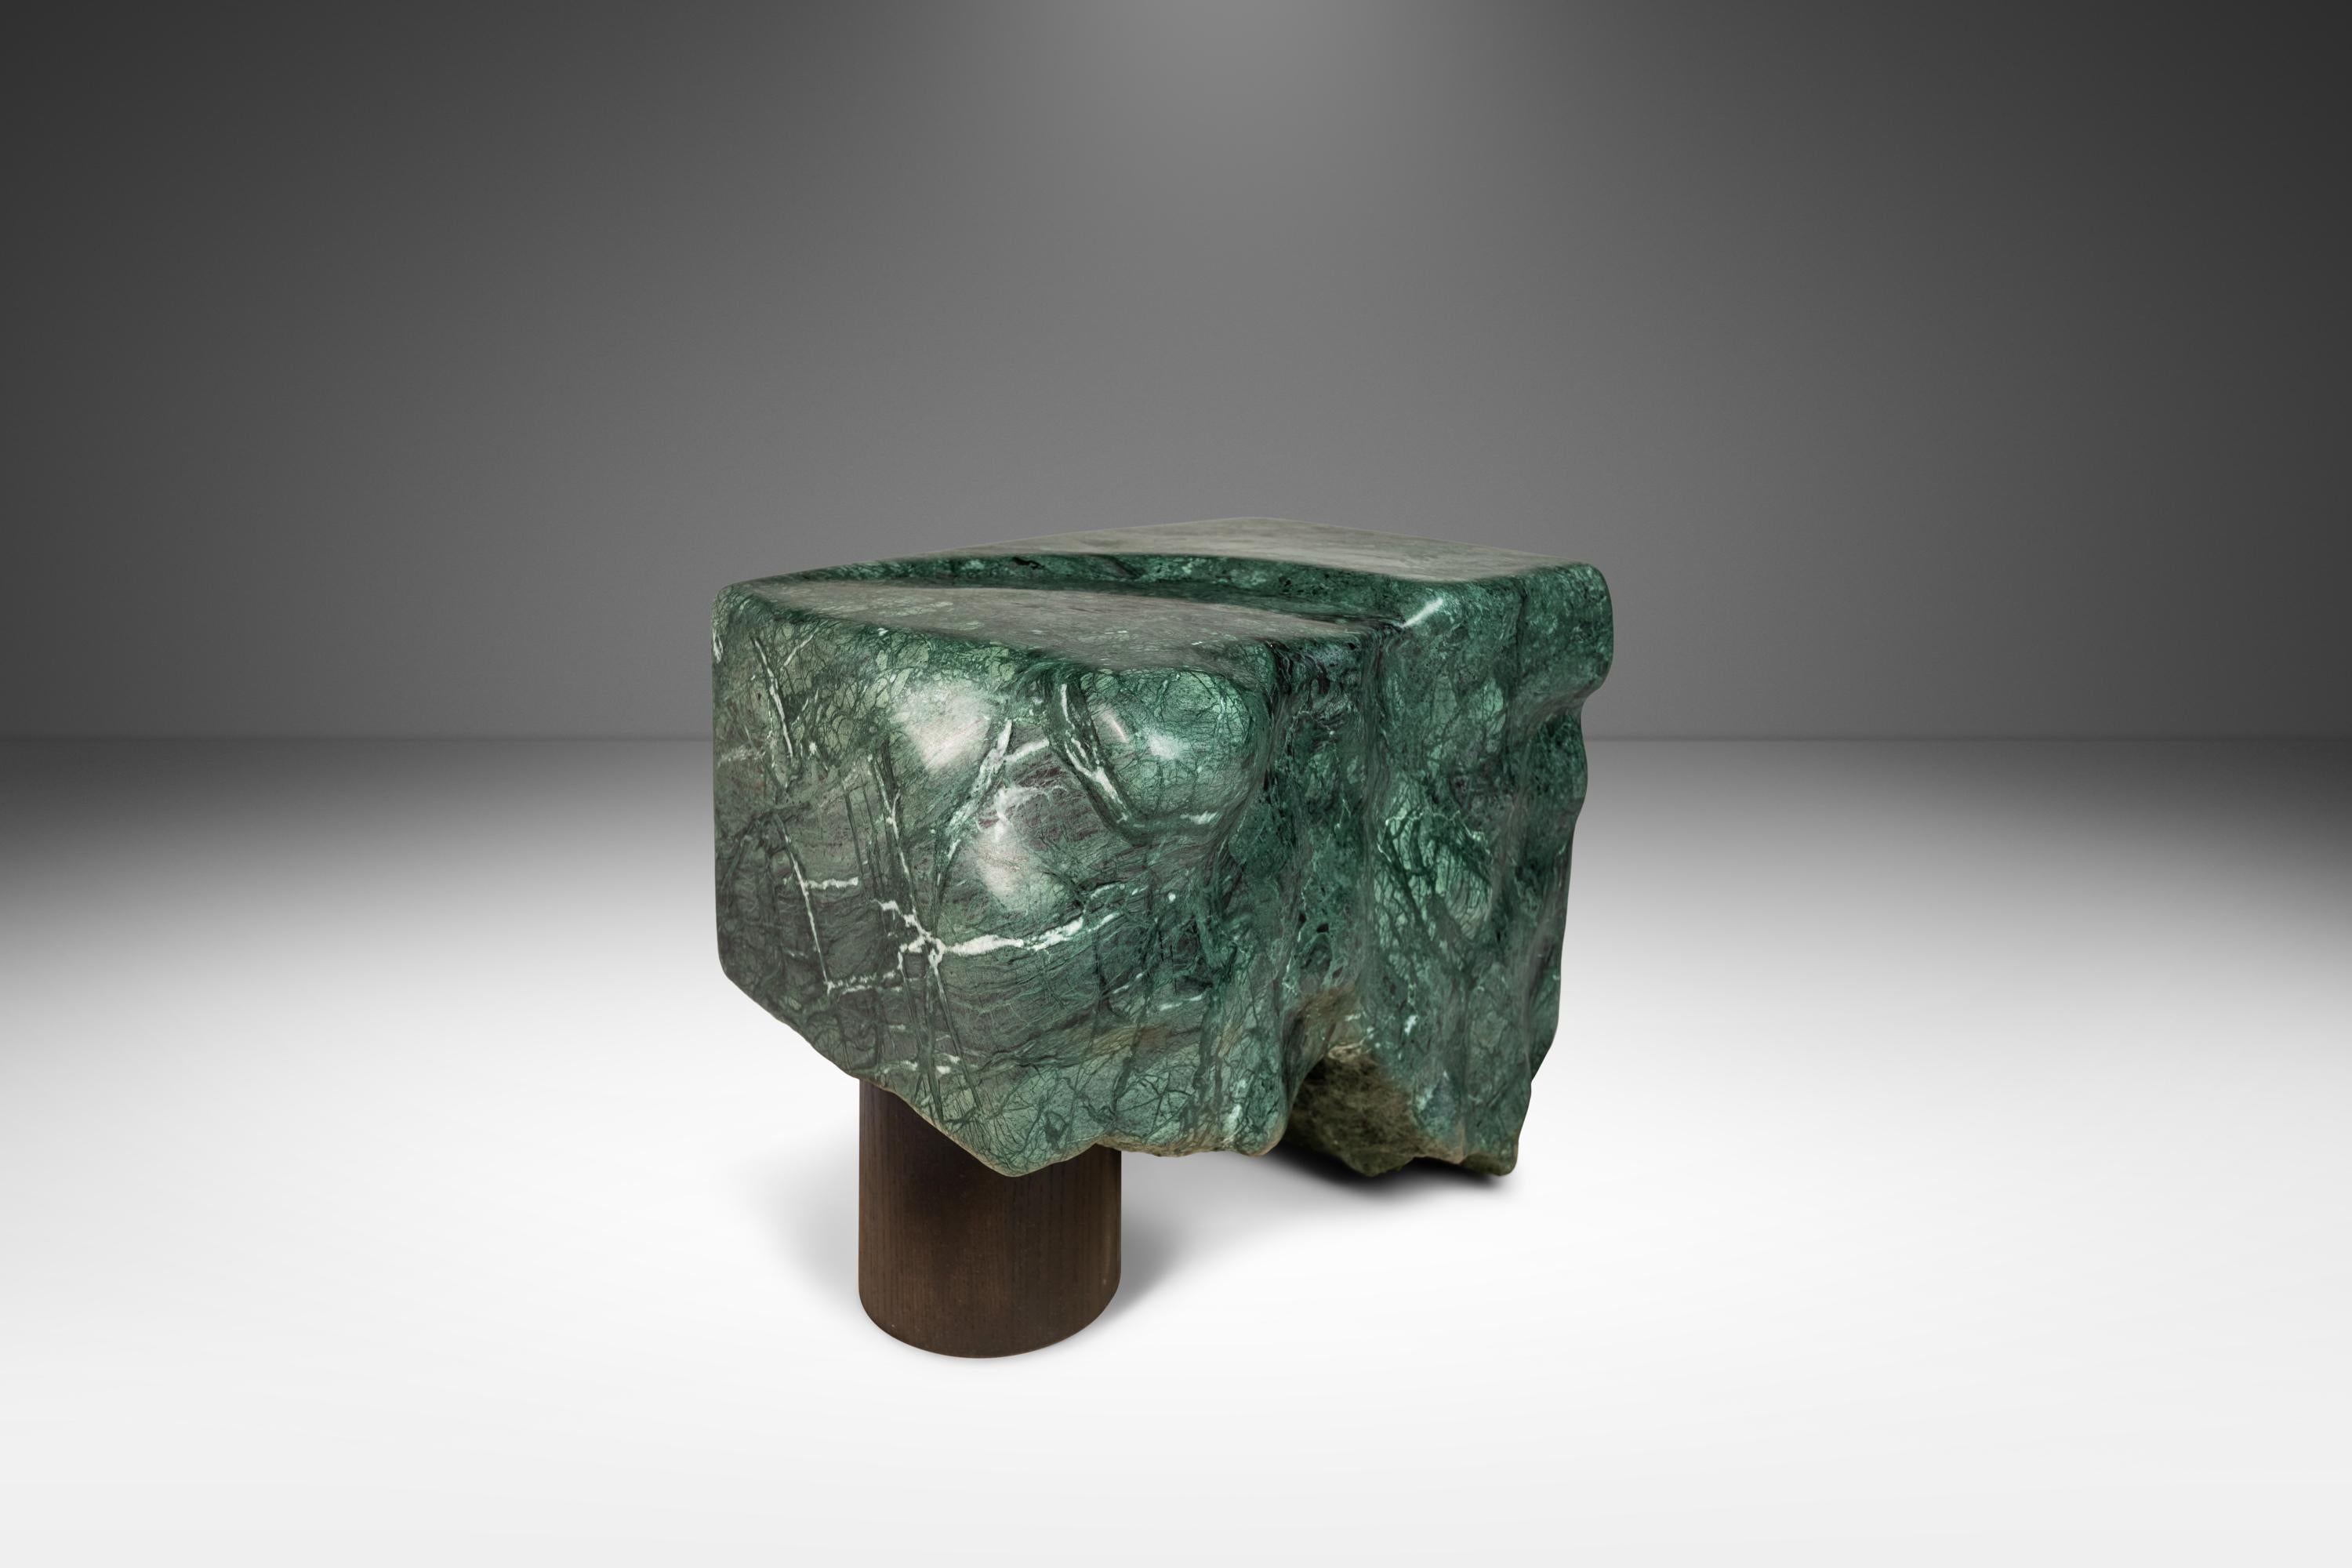 Hand-sculpted in pure, solid Guatemalan Green Marble this fascinating sculpture is absolutely arresting from every angel. Sculpted by Mark Leblanc, an accomplished designer and craftsmen renowned for his Organic Modern pieces audaciously carved from